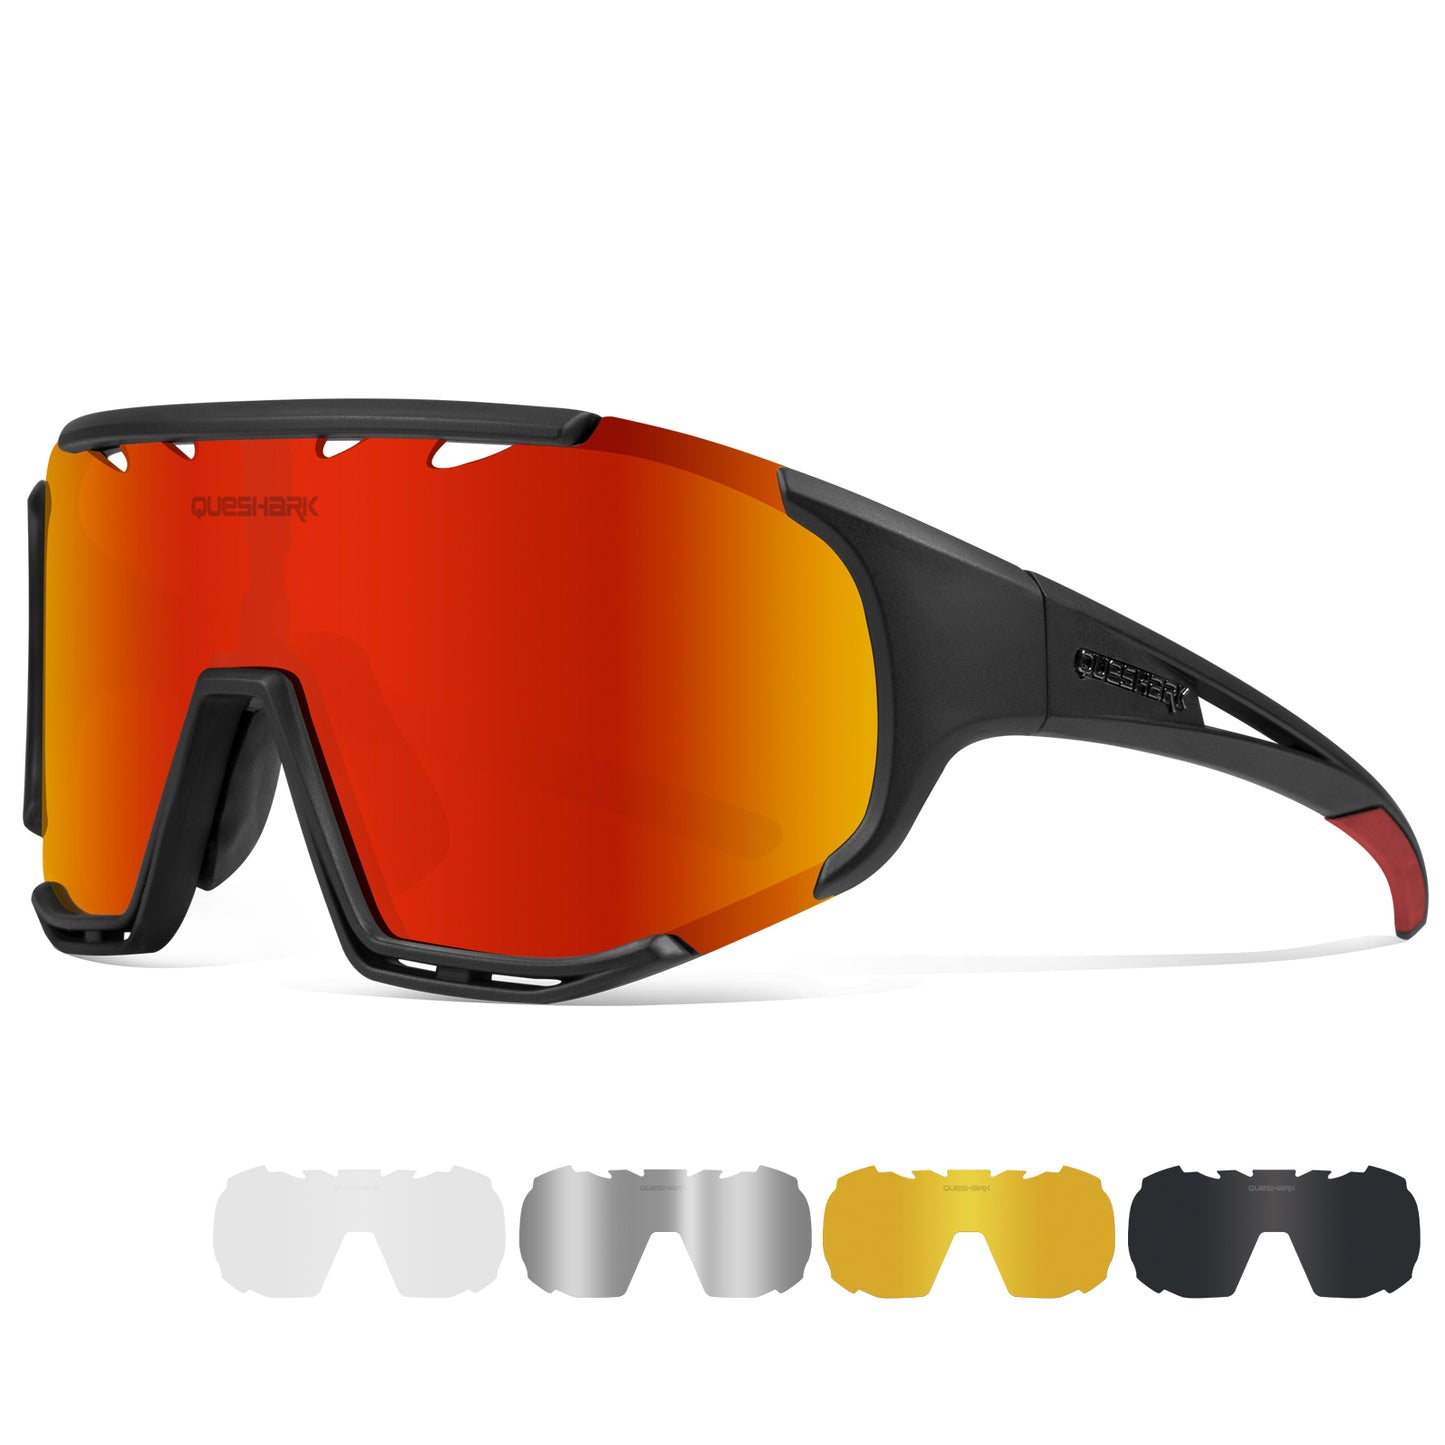 QE55 Black Red Polarized Sunglasses Cycling Eyewear Men Women Oversized Driving Glasses with 5 Lens